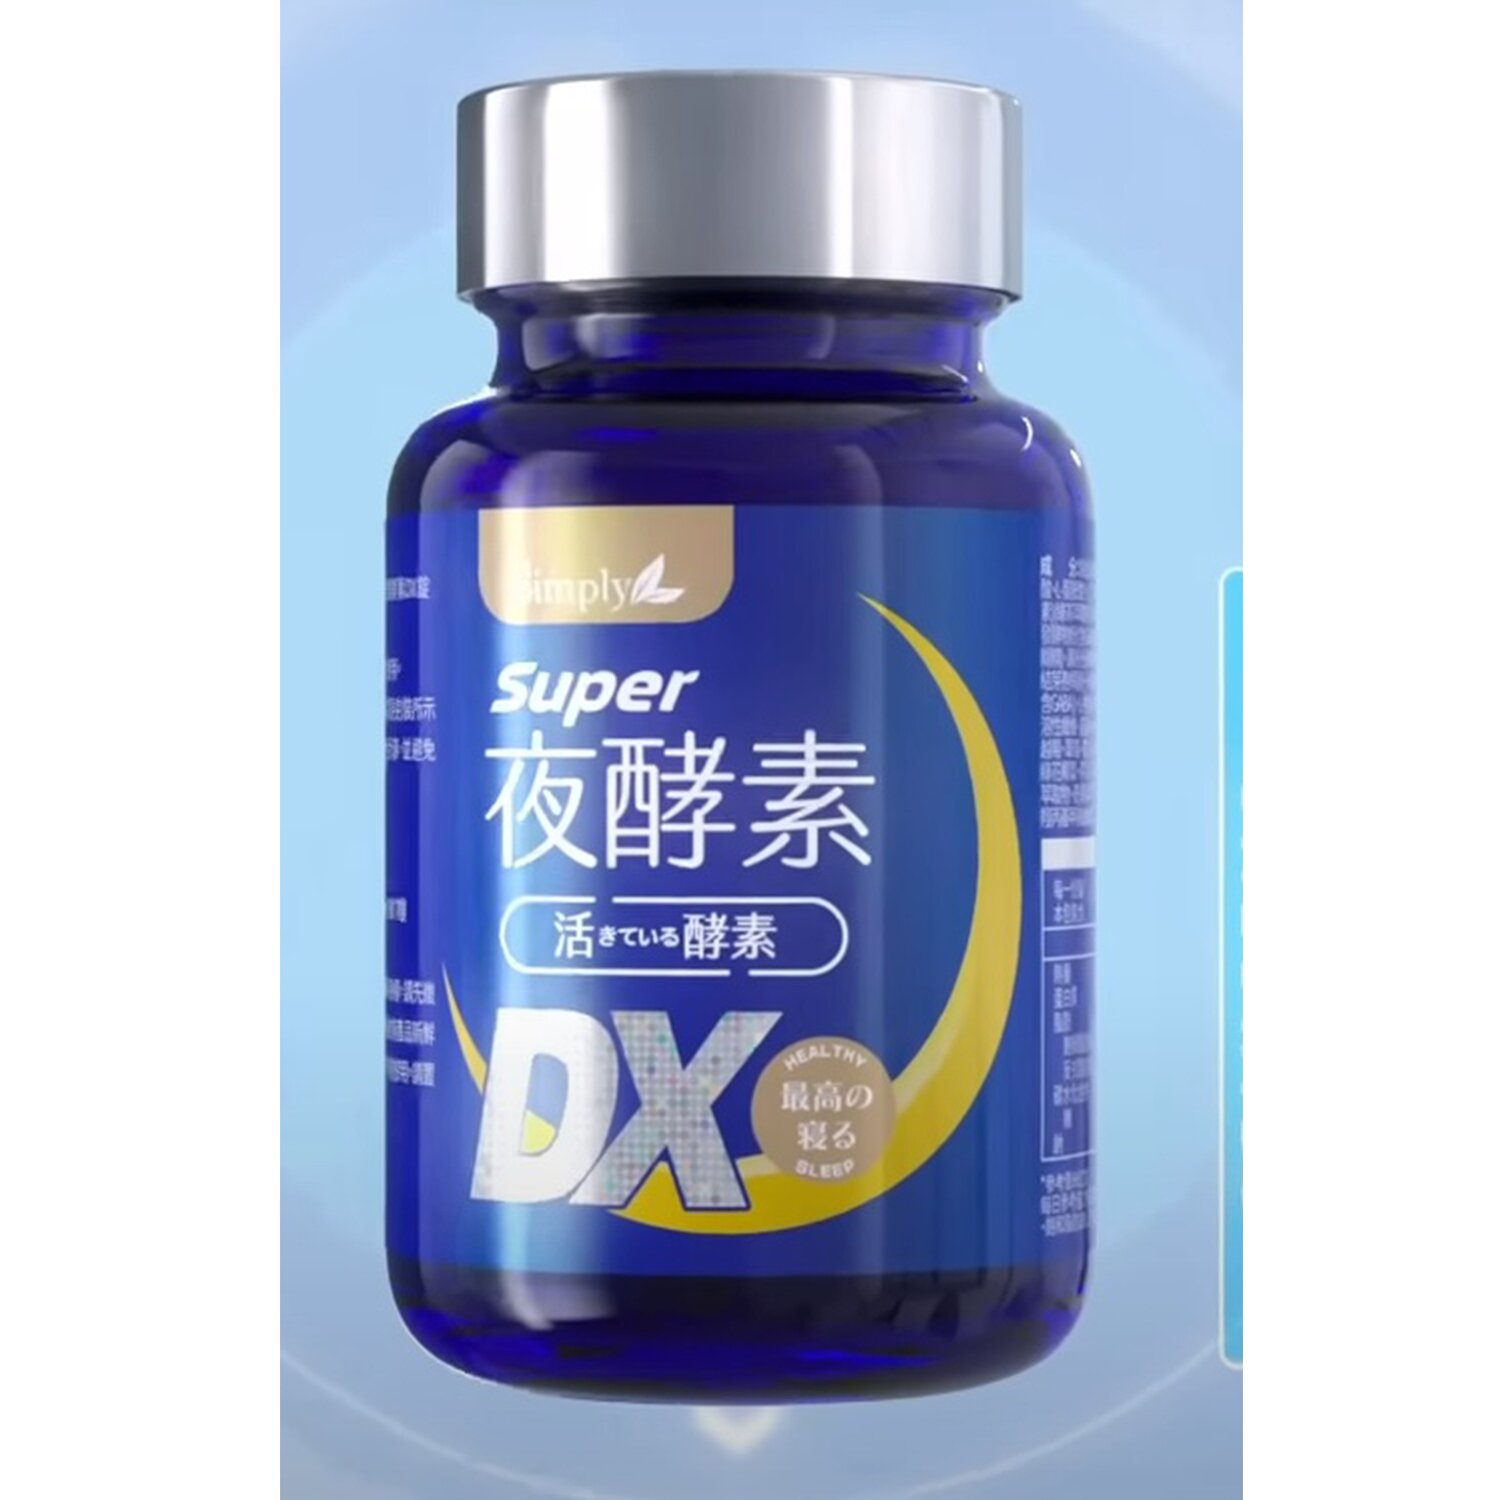 Simply Simply Super Super Night Enzyme DX 30 capsules